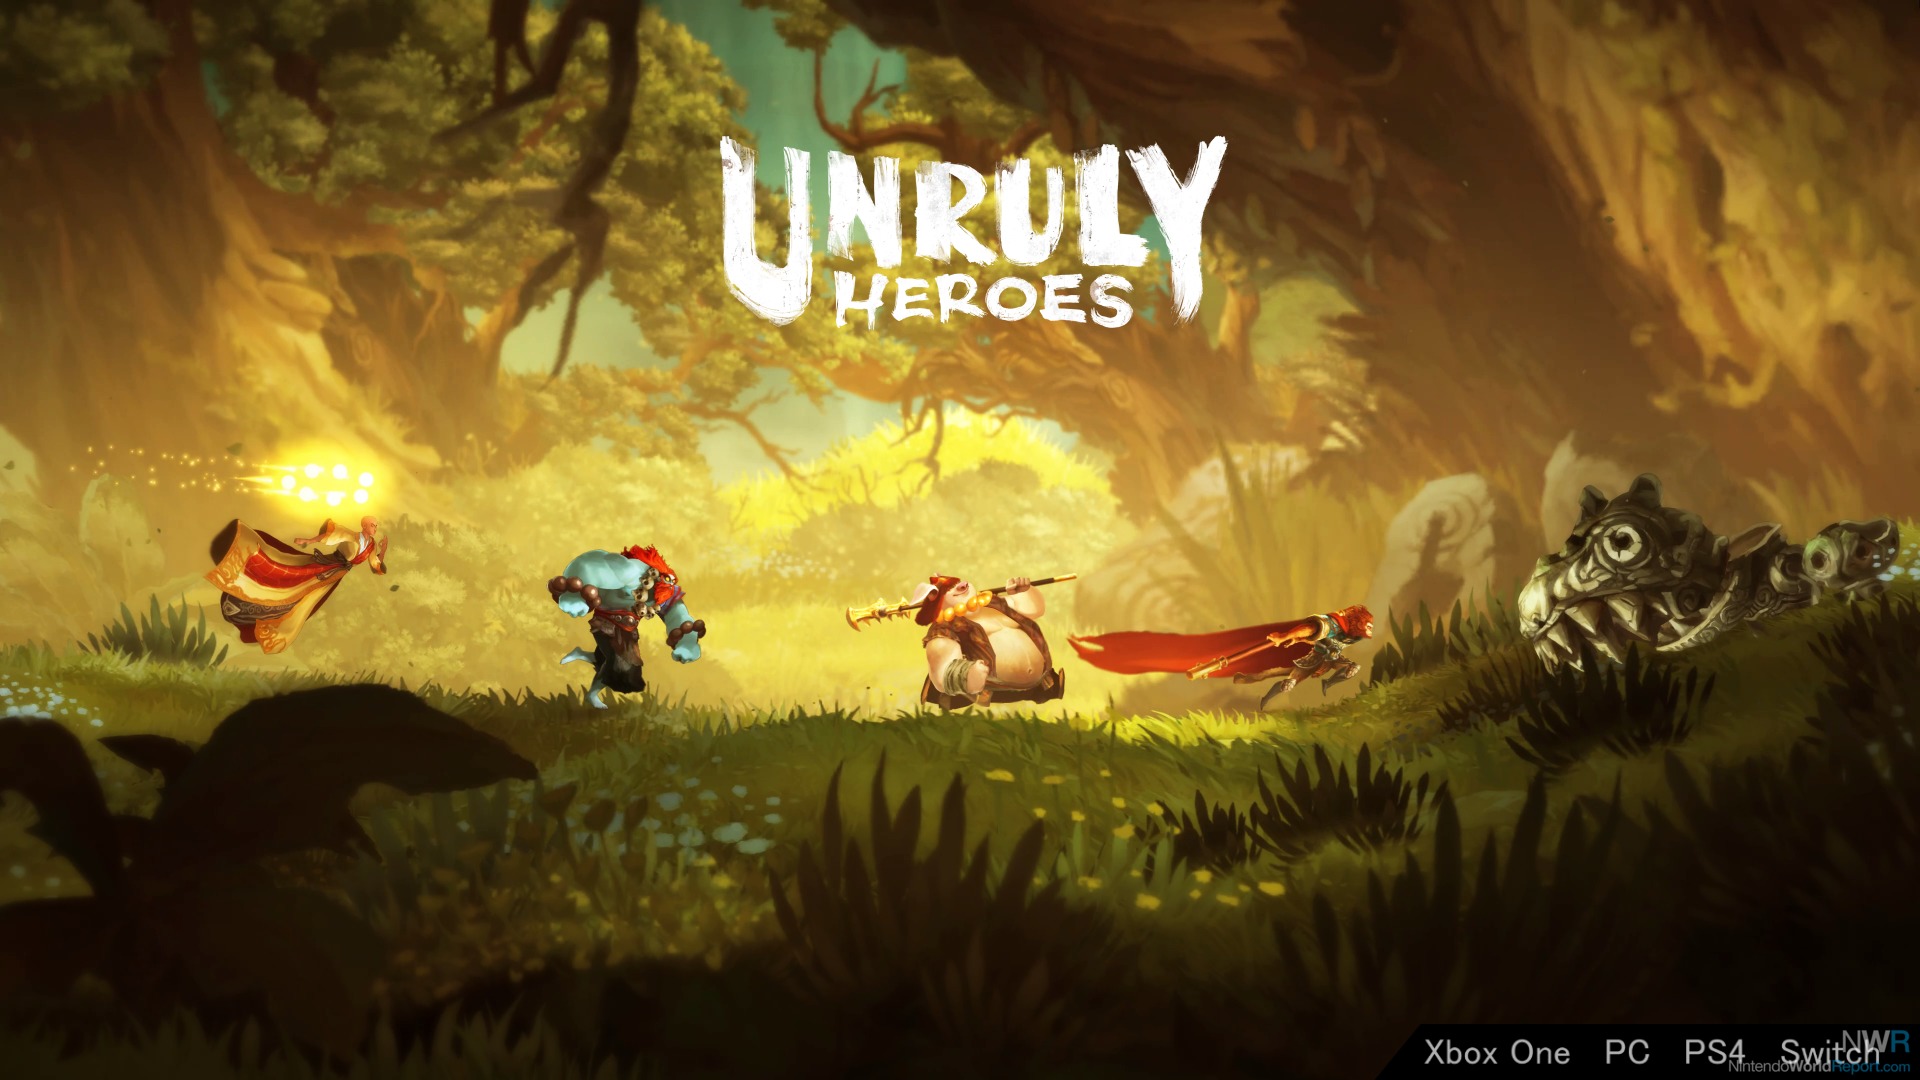 Unruly Heroes Announced for Switch - News - Nintendo World Report